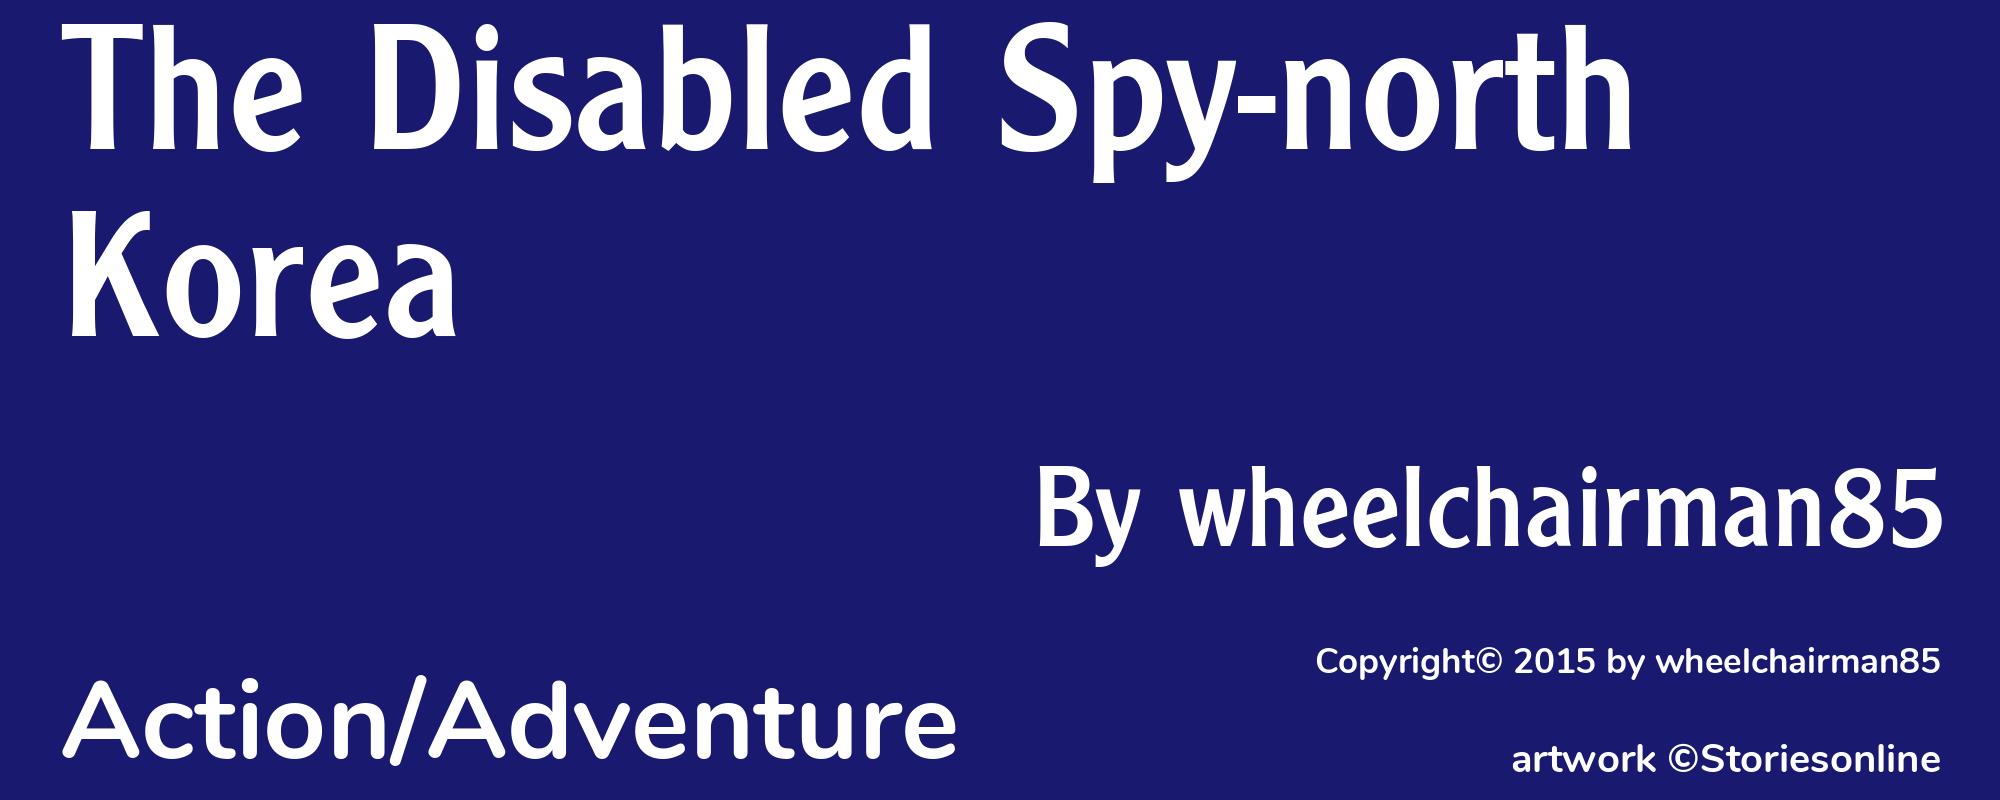 The Disabled Spy-north Korea - Cover